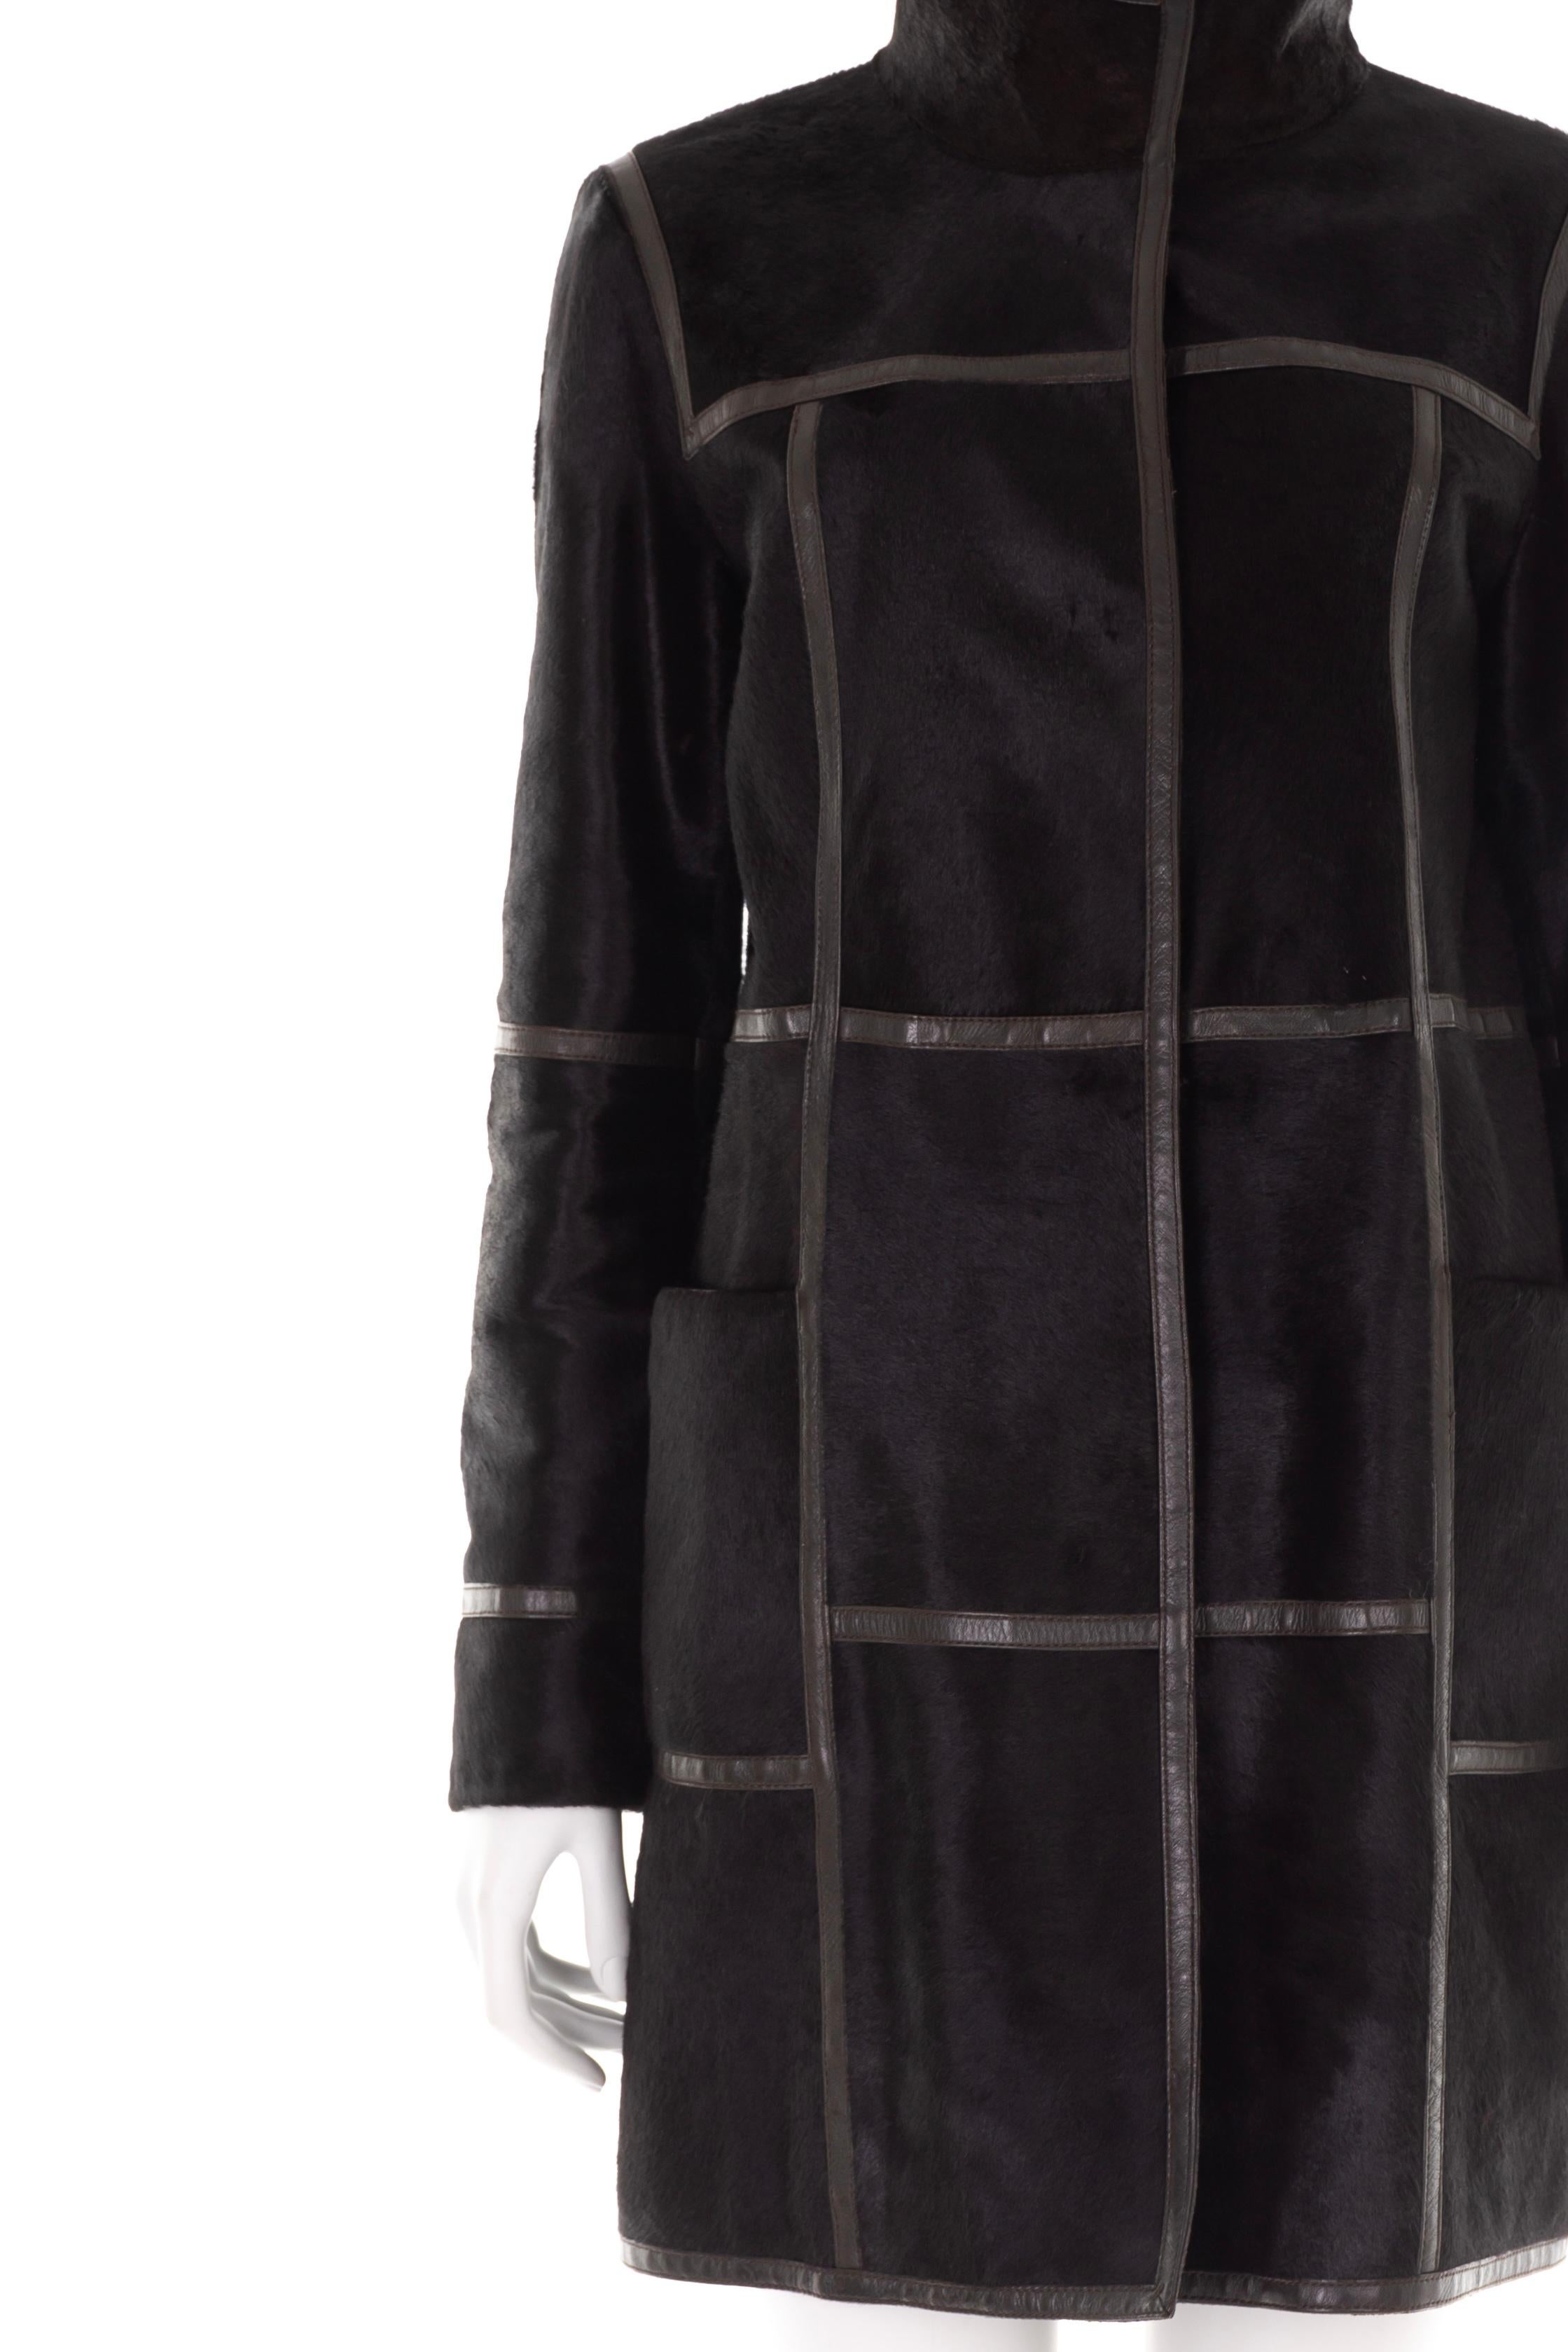 - Prada by Miuccia Prada
- Sold by Gold Palms Vintage
- Fall Winter 2005 collection
- Black calfskin hooded coat 
- Internal padding
- Long sleeve
- Double flat pockets
- Brown leather detailing
- Internal snap button fastening
- Size: IT